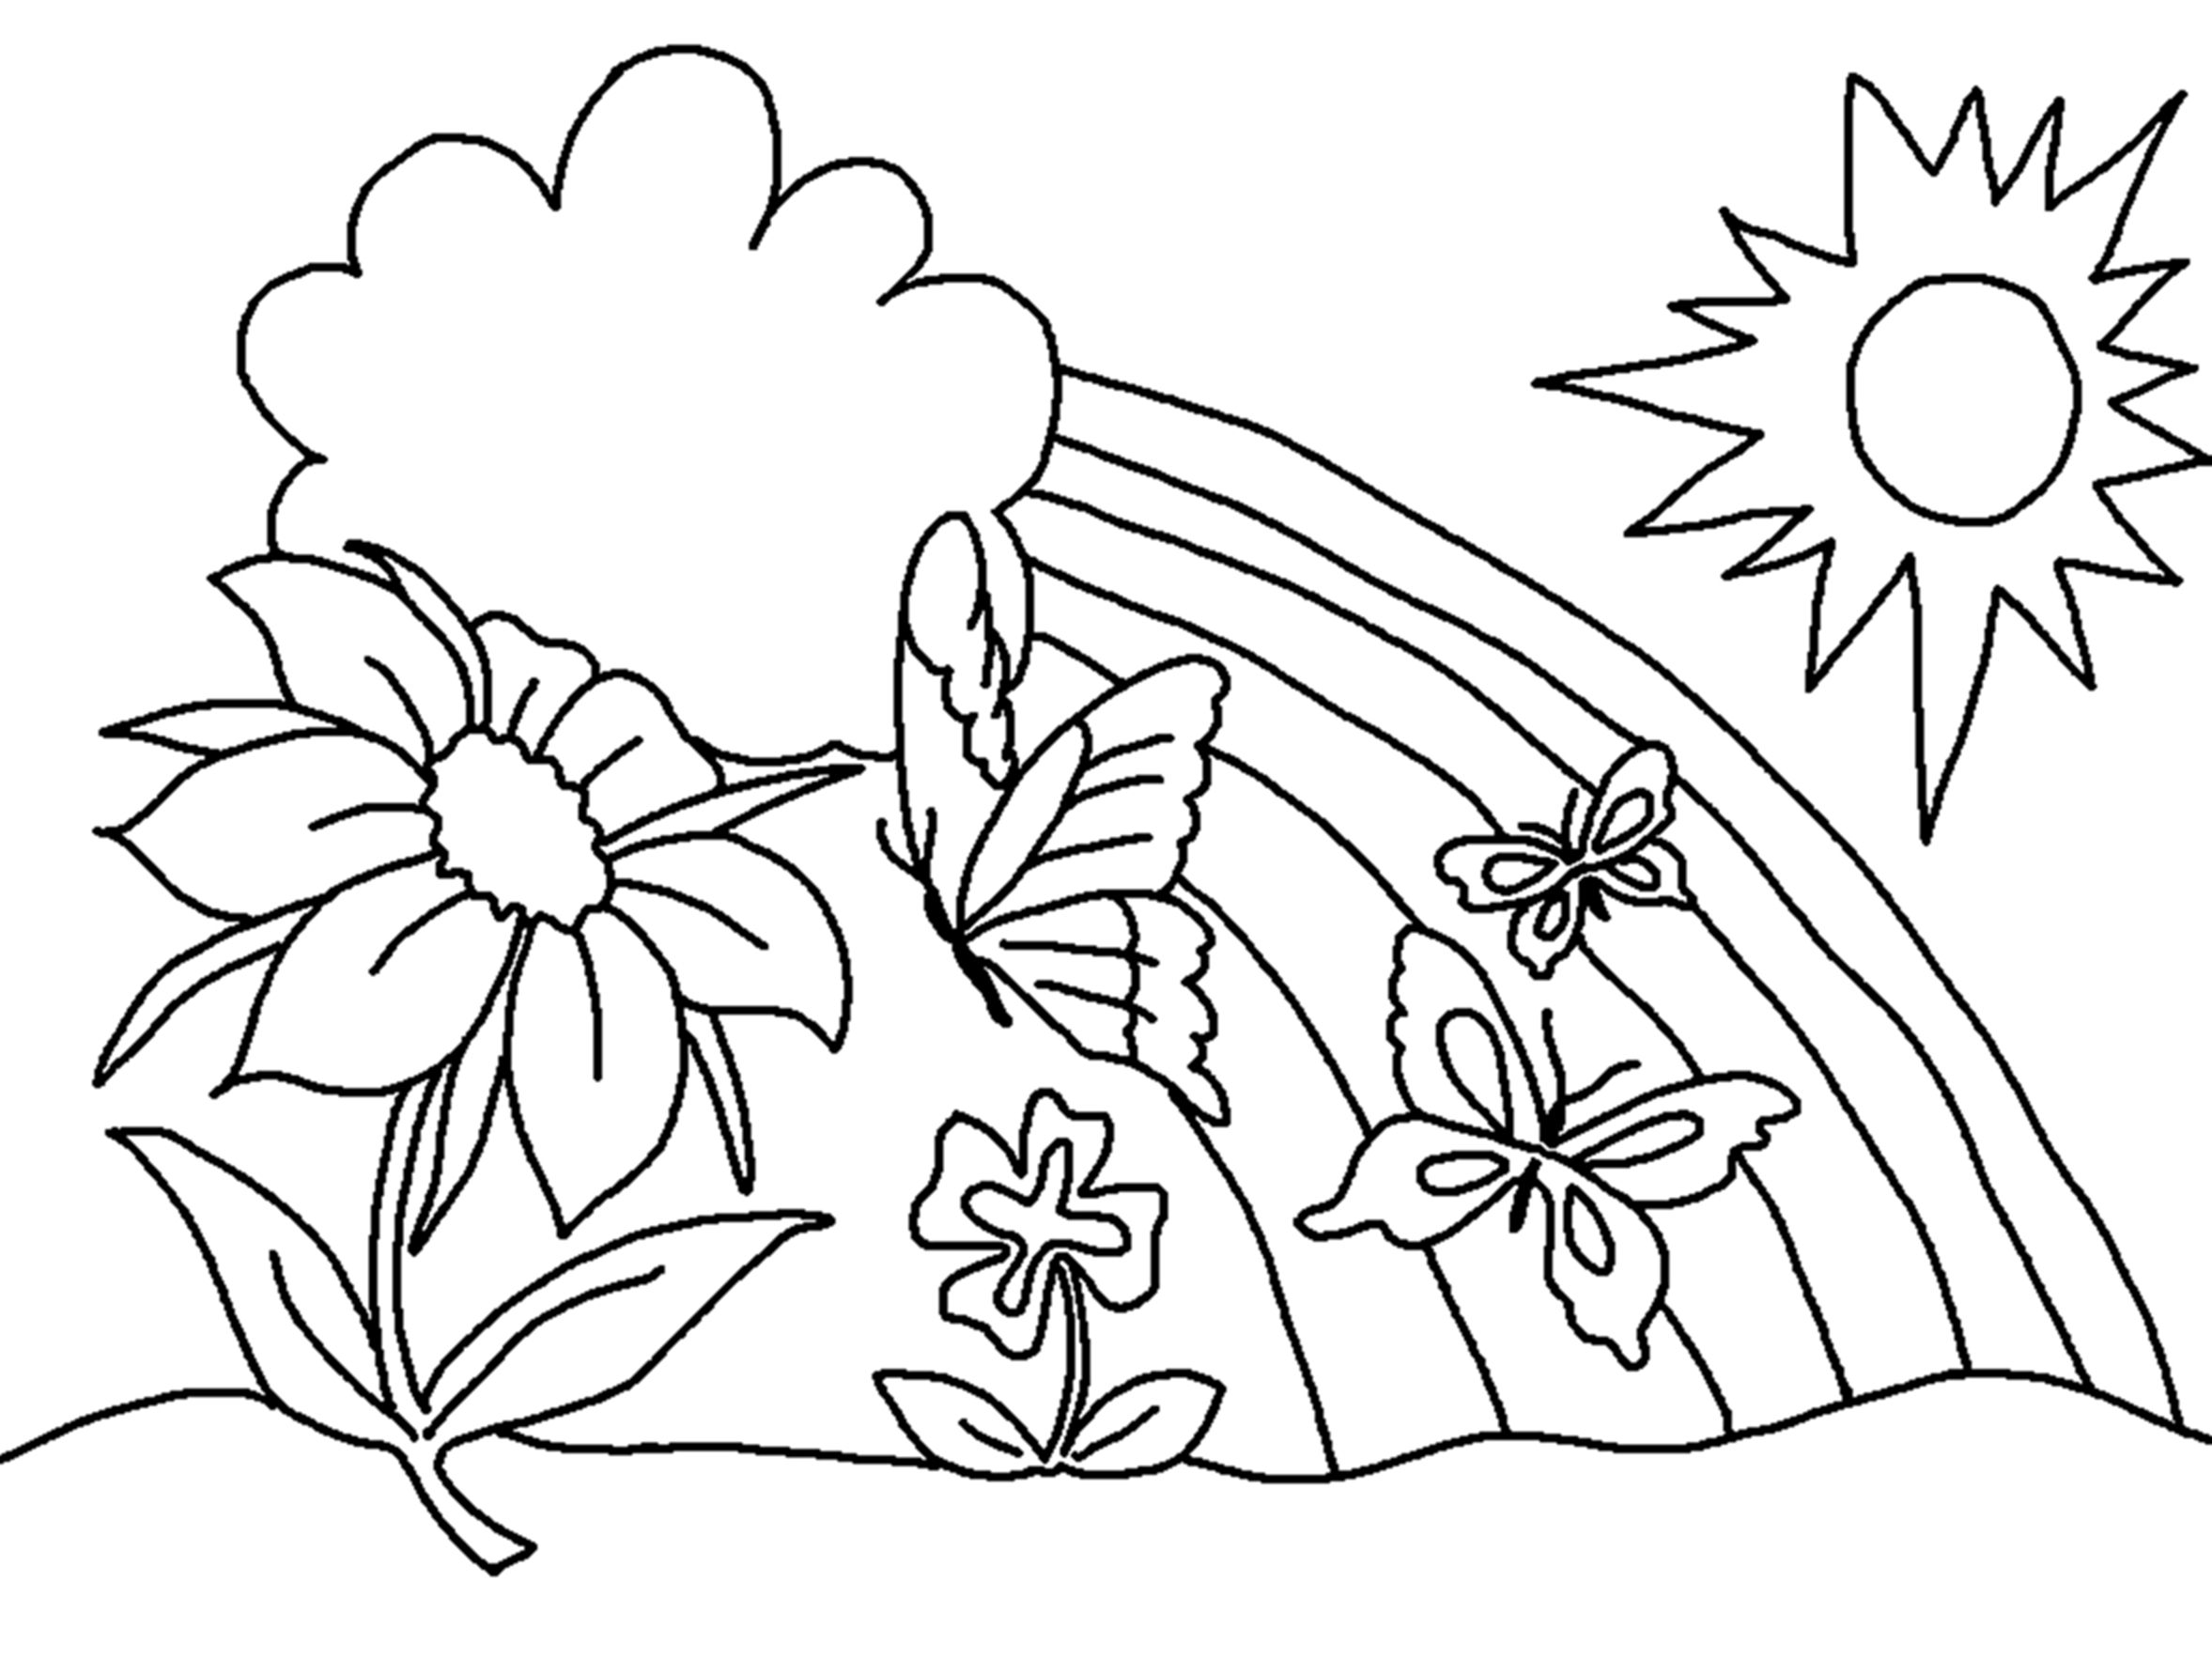 Spring Coloring Pages For Toddlers Toddler Coloring Pages Flower Photo Album Sabadaphnecottage